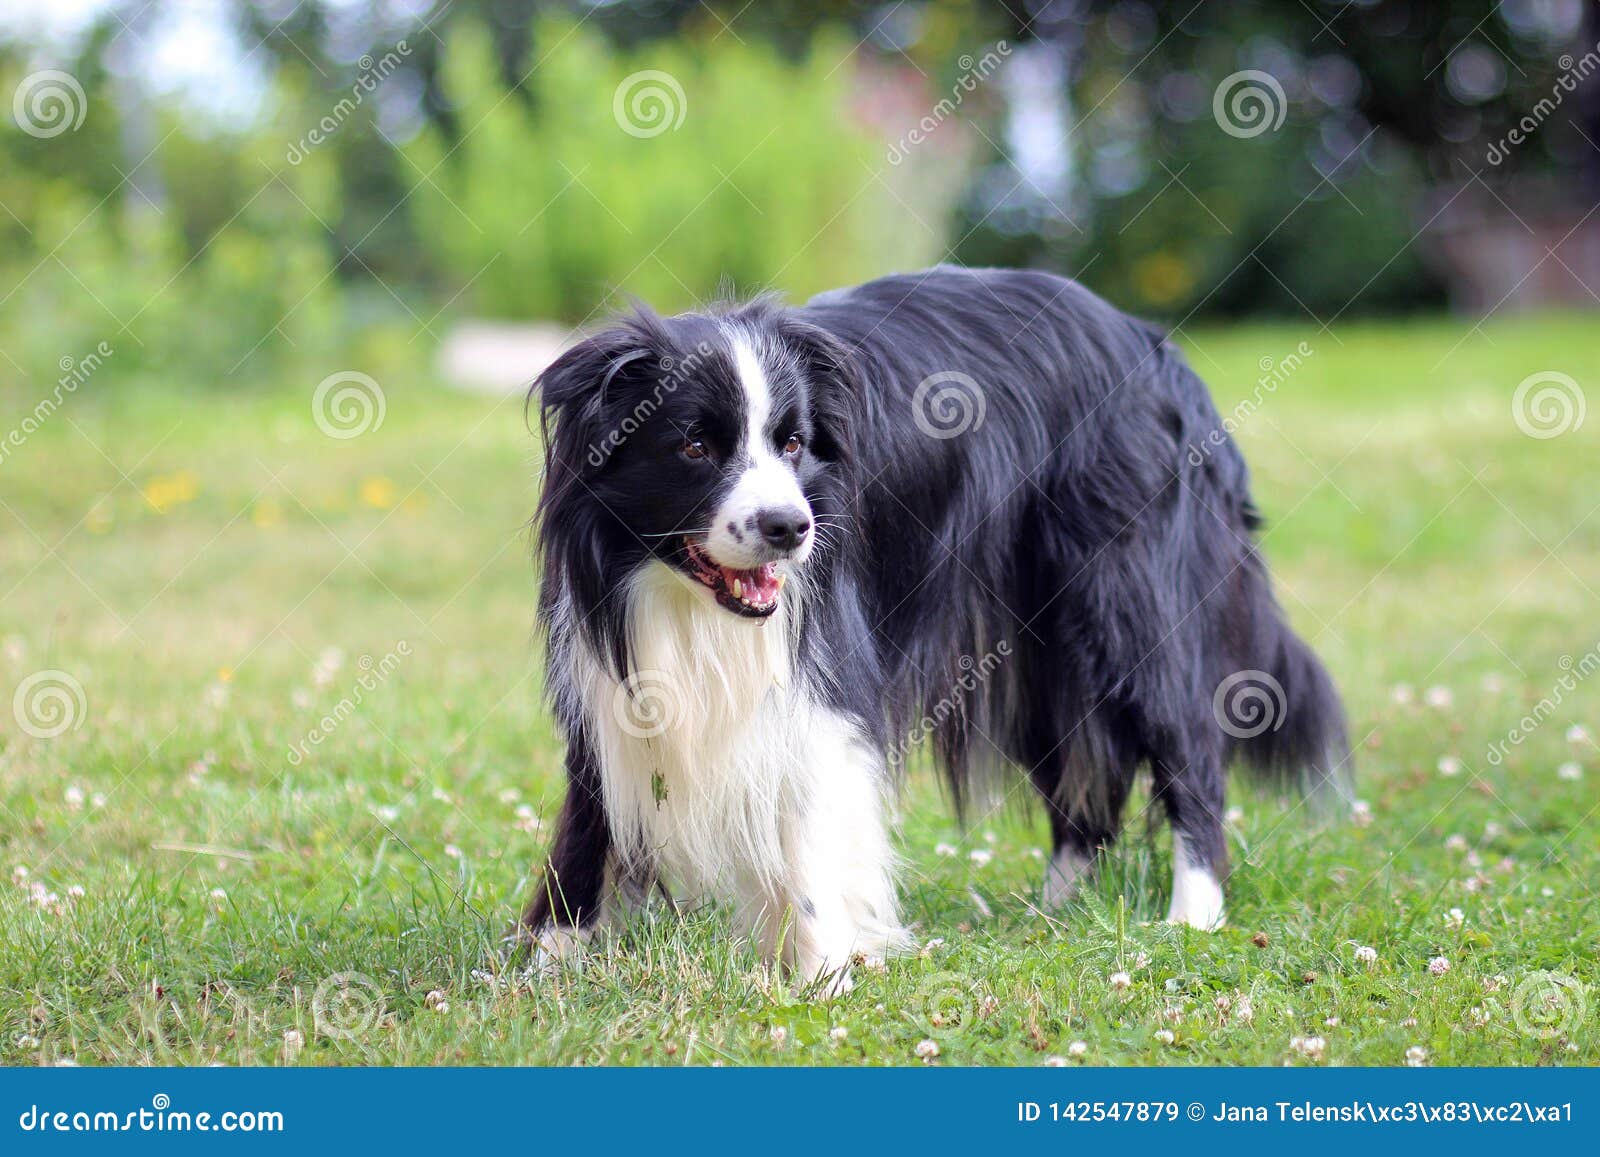 do all border collies have long hair